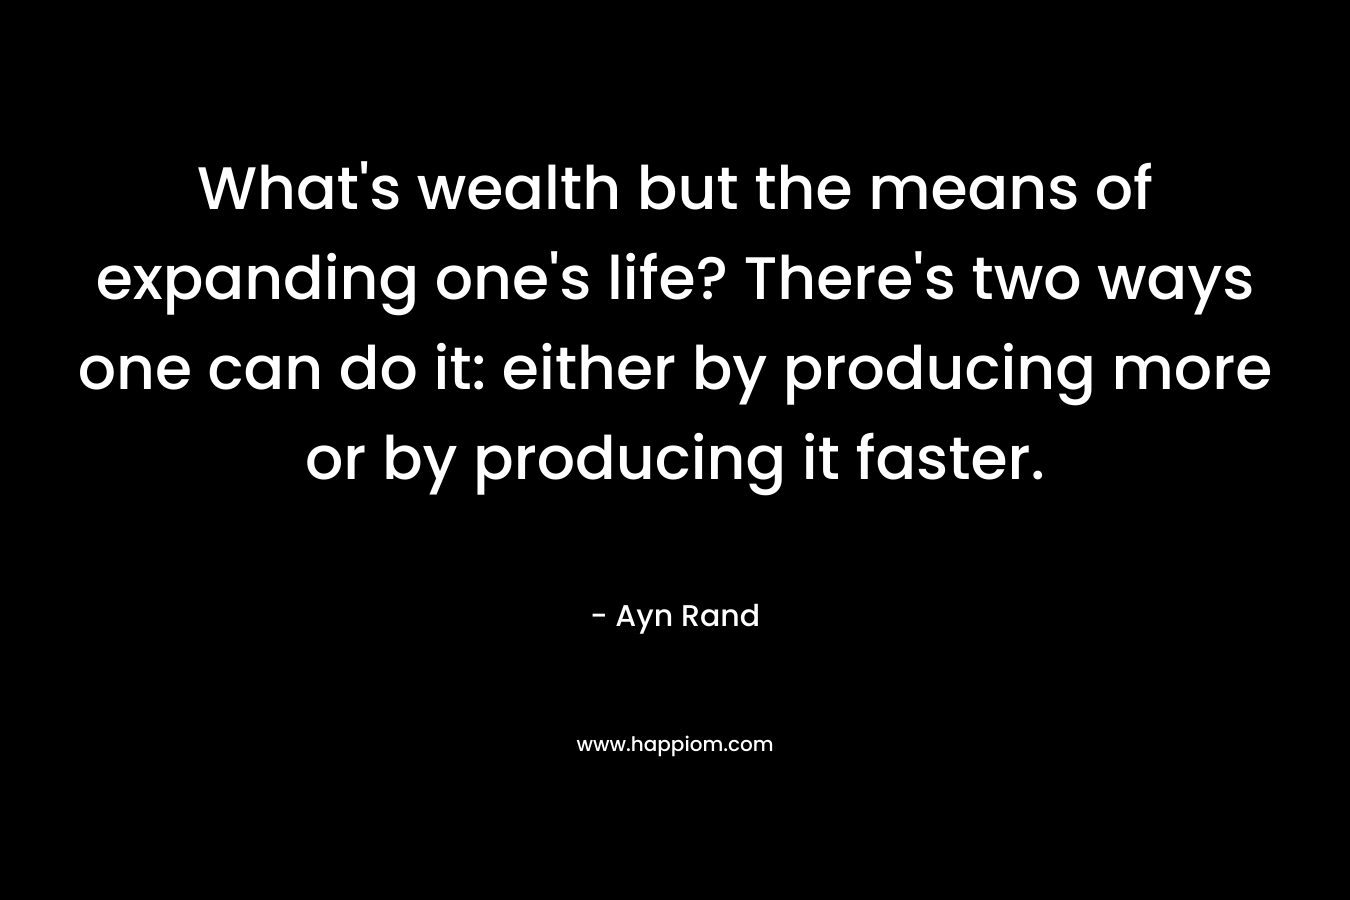 What's wealth but the means of expanding one's life? There's two ways one can do it: either by producing more or by producing it faster.